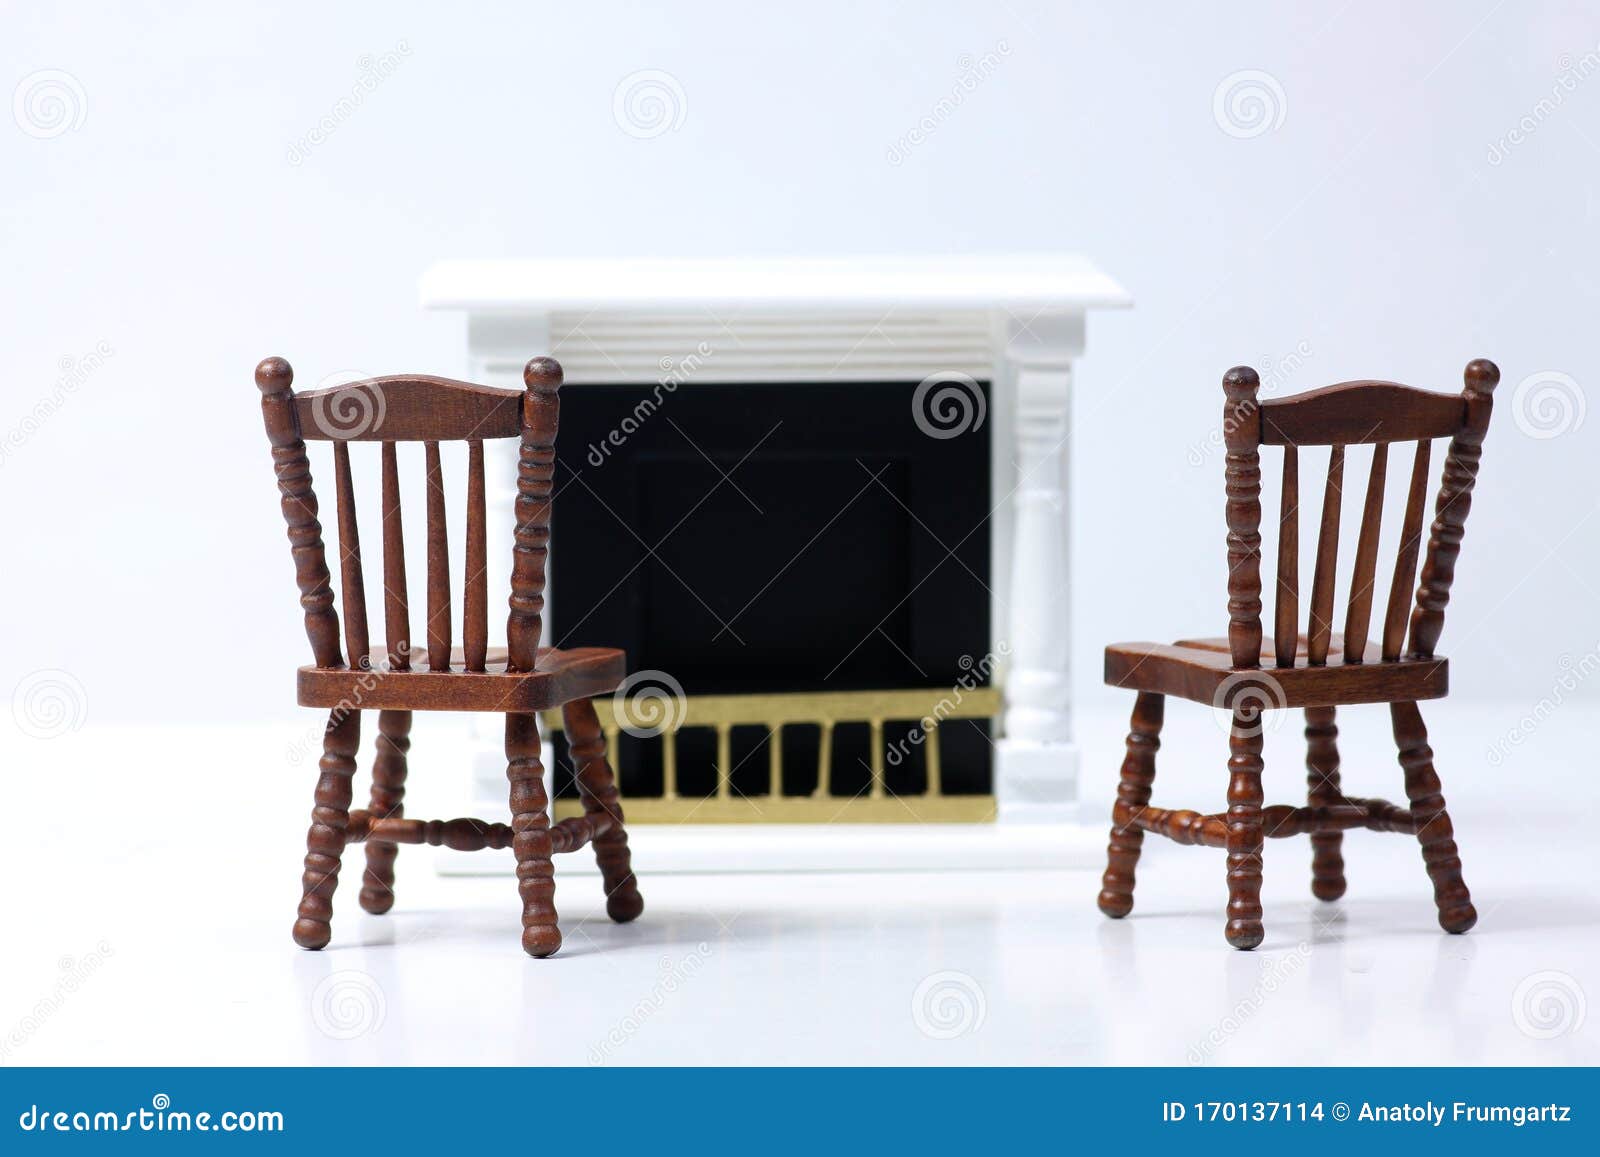 Doll House Interior - Two Chairs Next To Fire Place Isolated on White  Background Stock Photo - Image of house, chair: 170137114